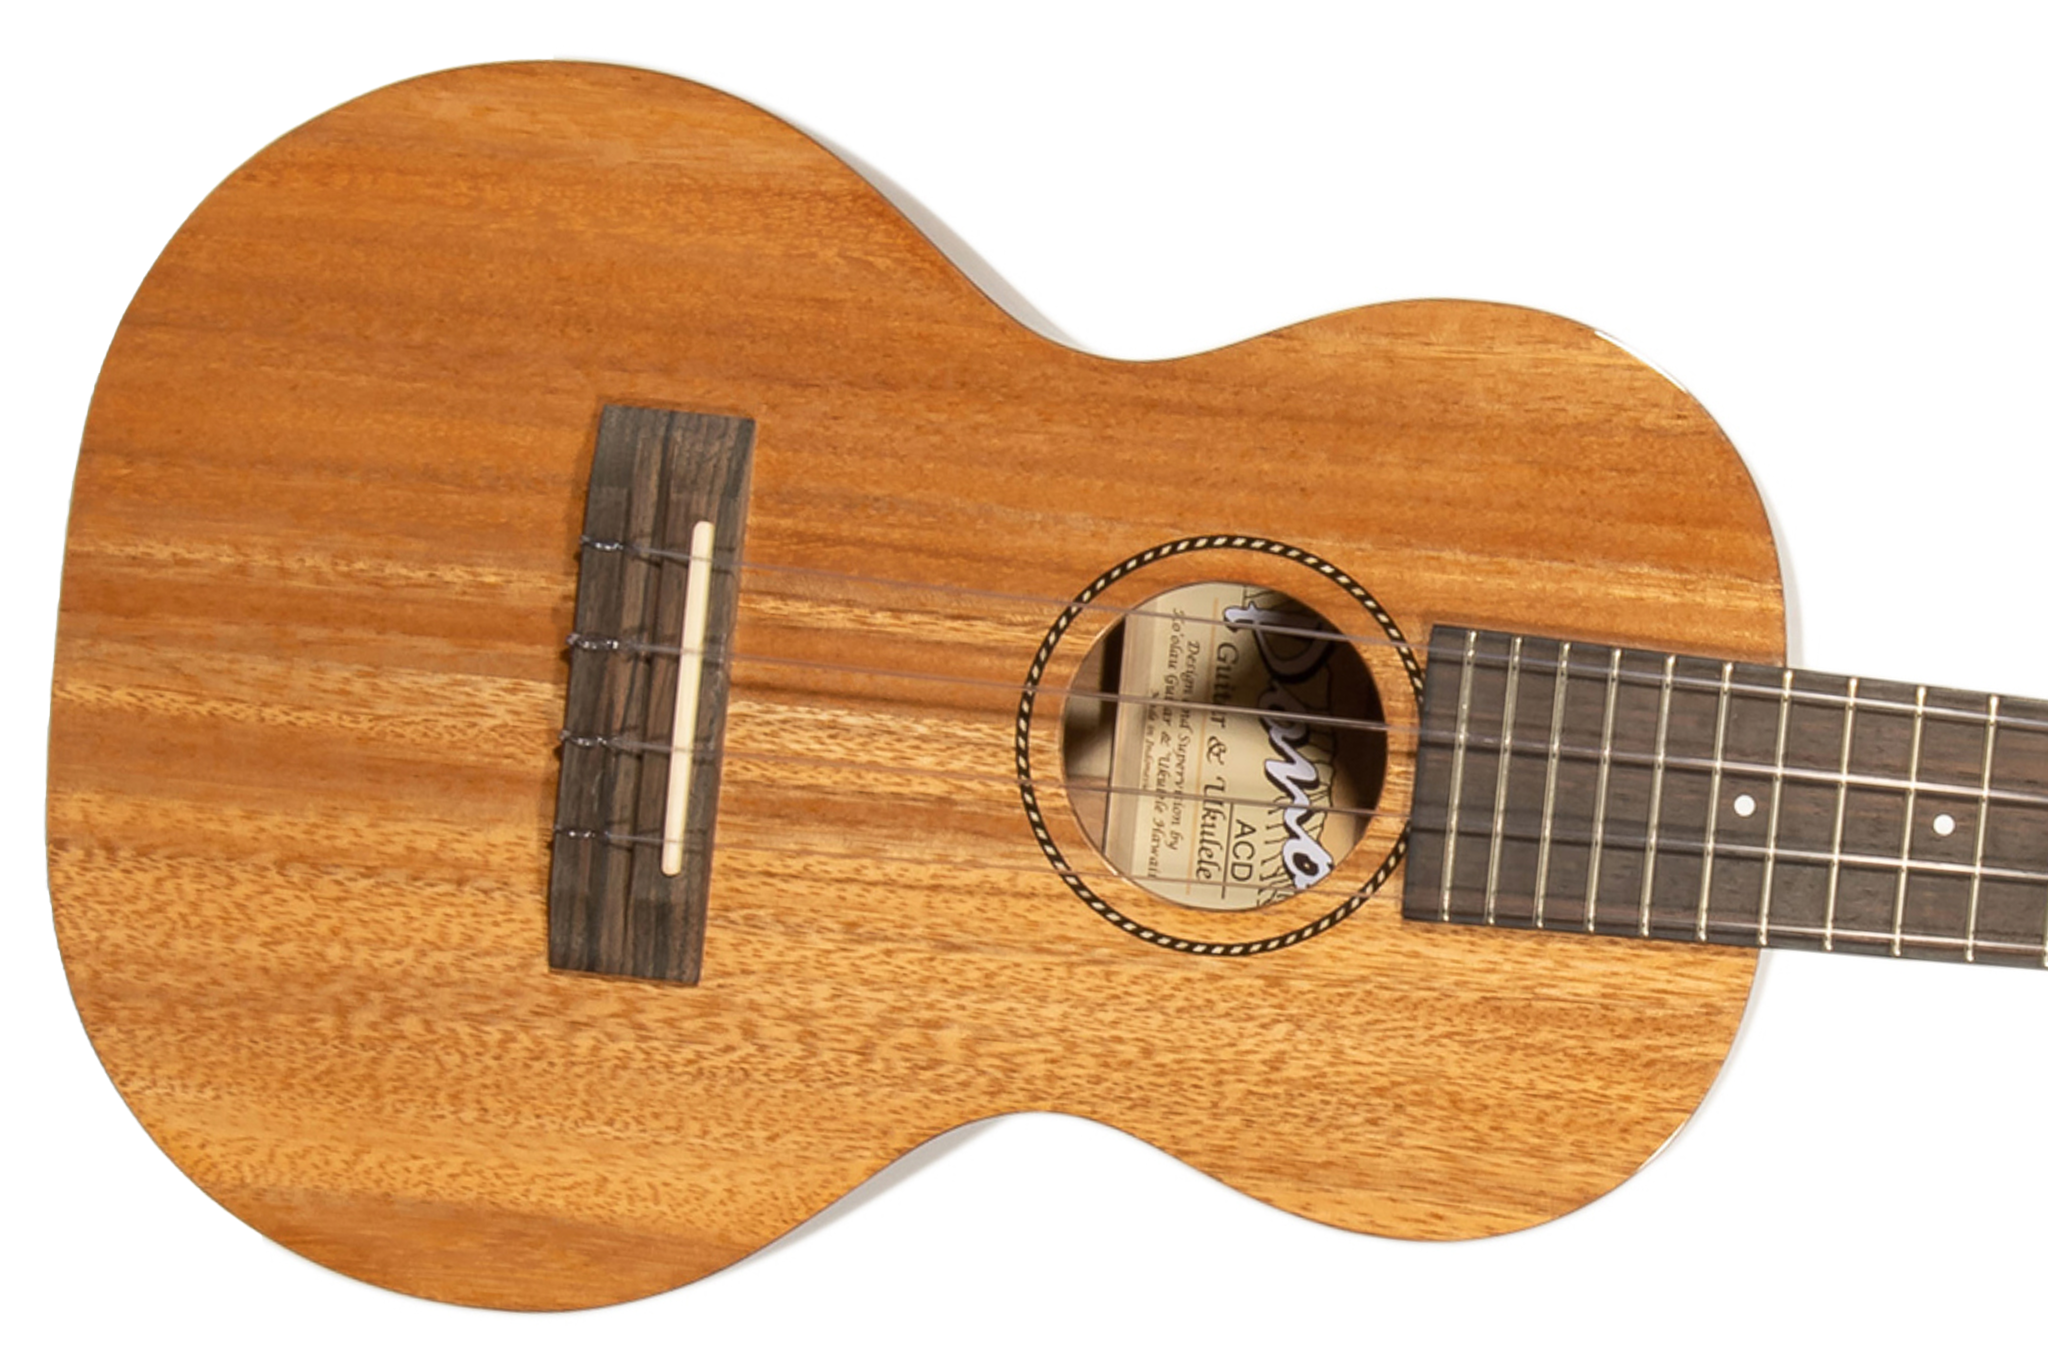 Pono ACD Deluxe Concert Ukulele All Solid Acacia "Exton"